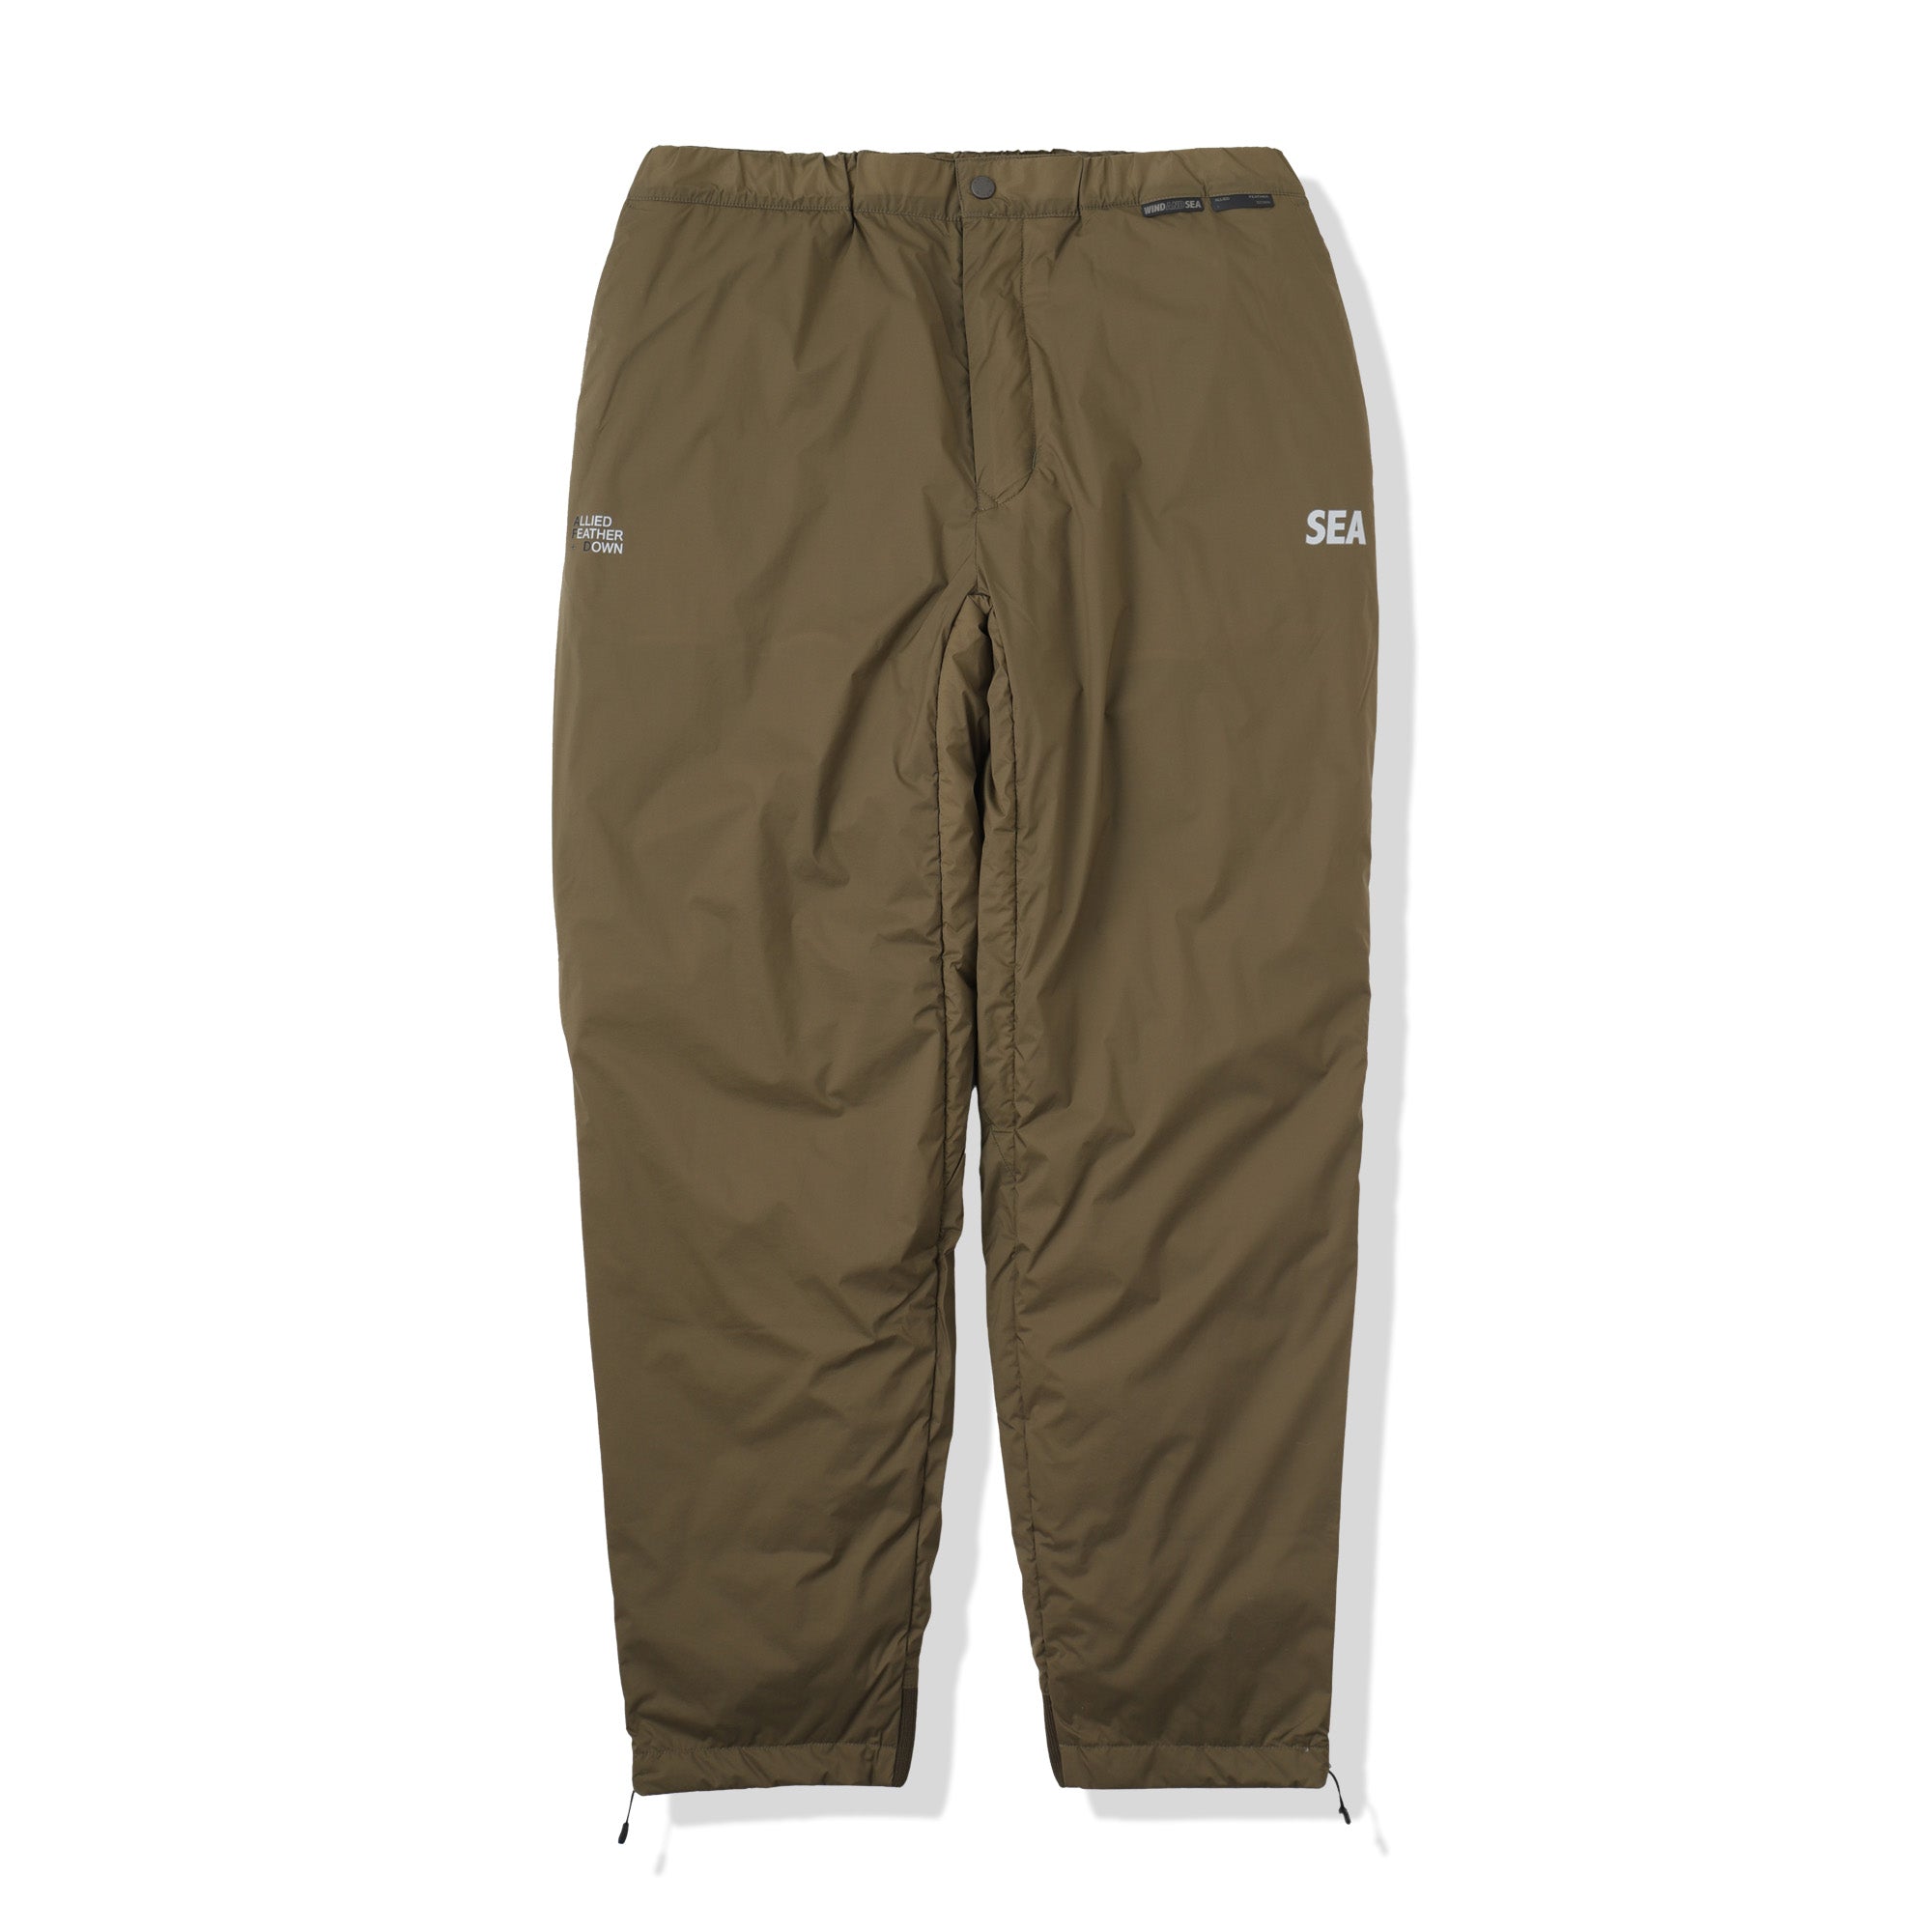 【WIND AND SEA collaboration】 LOUNGE DOWN PANTS